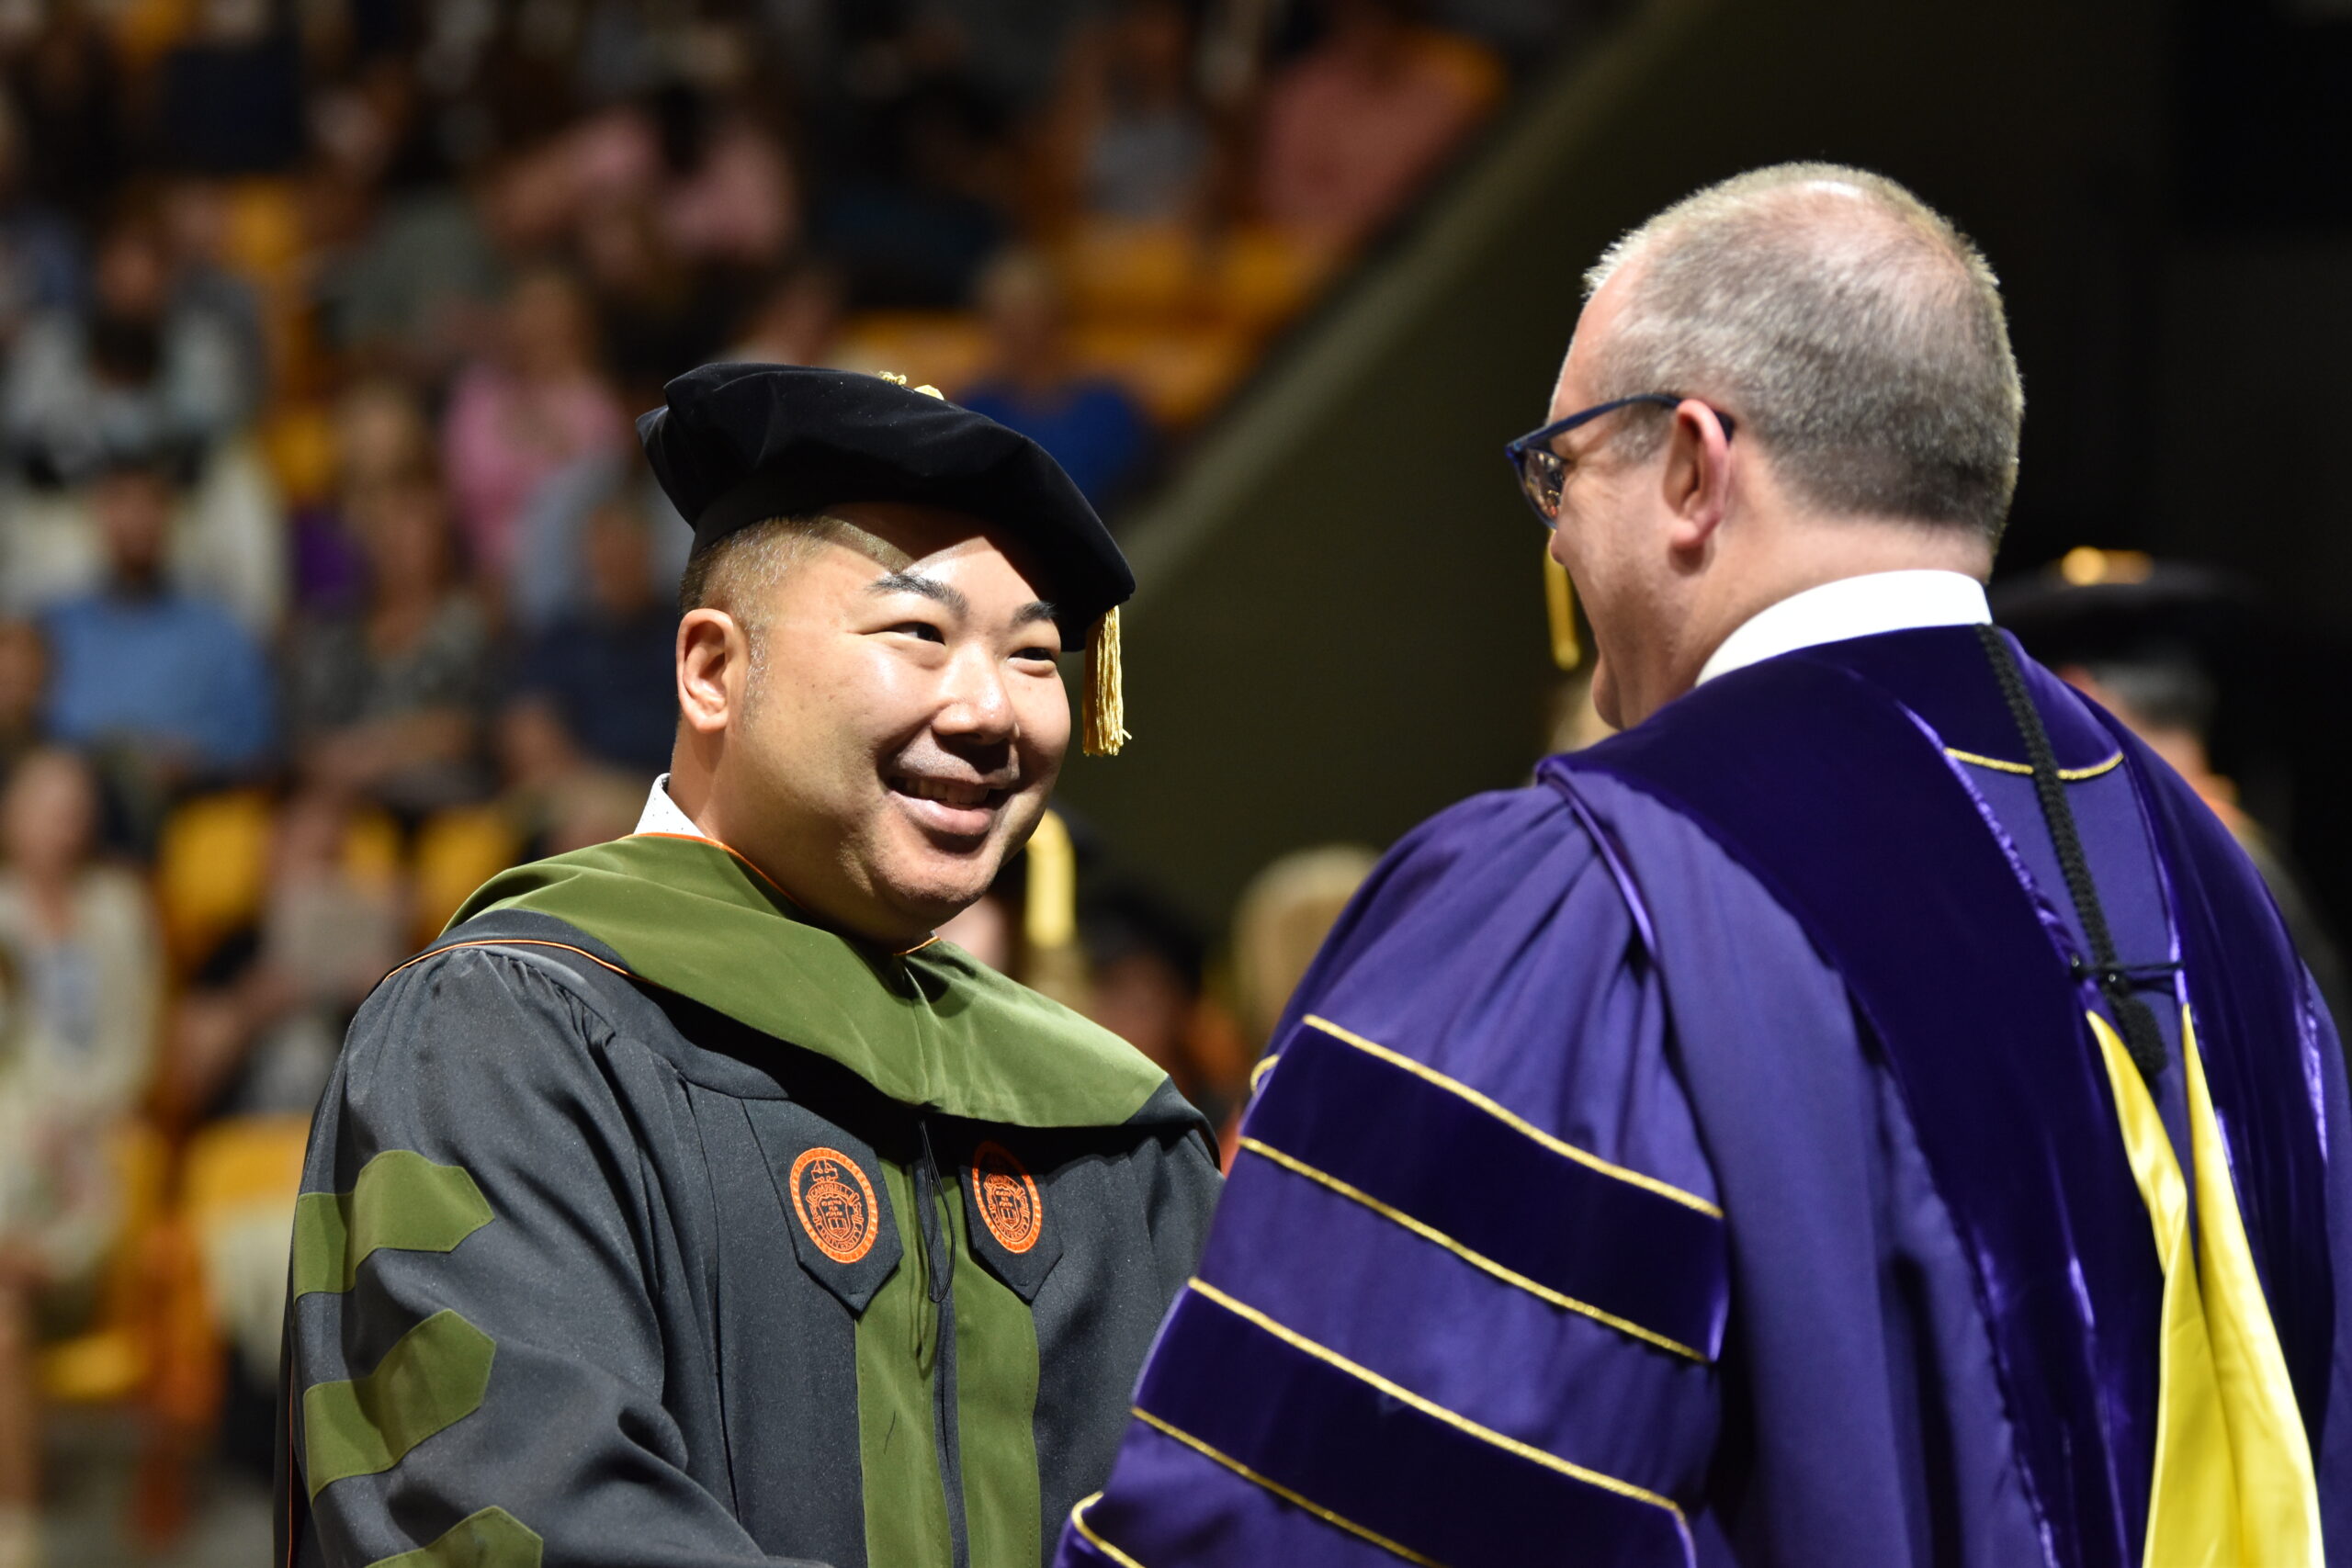 College of Pharmacy & Health Sciences celebrates 33rd commencement - News